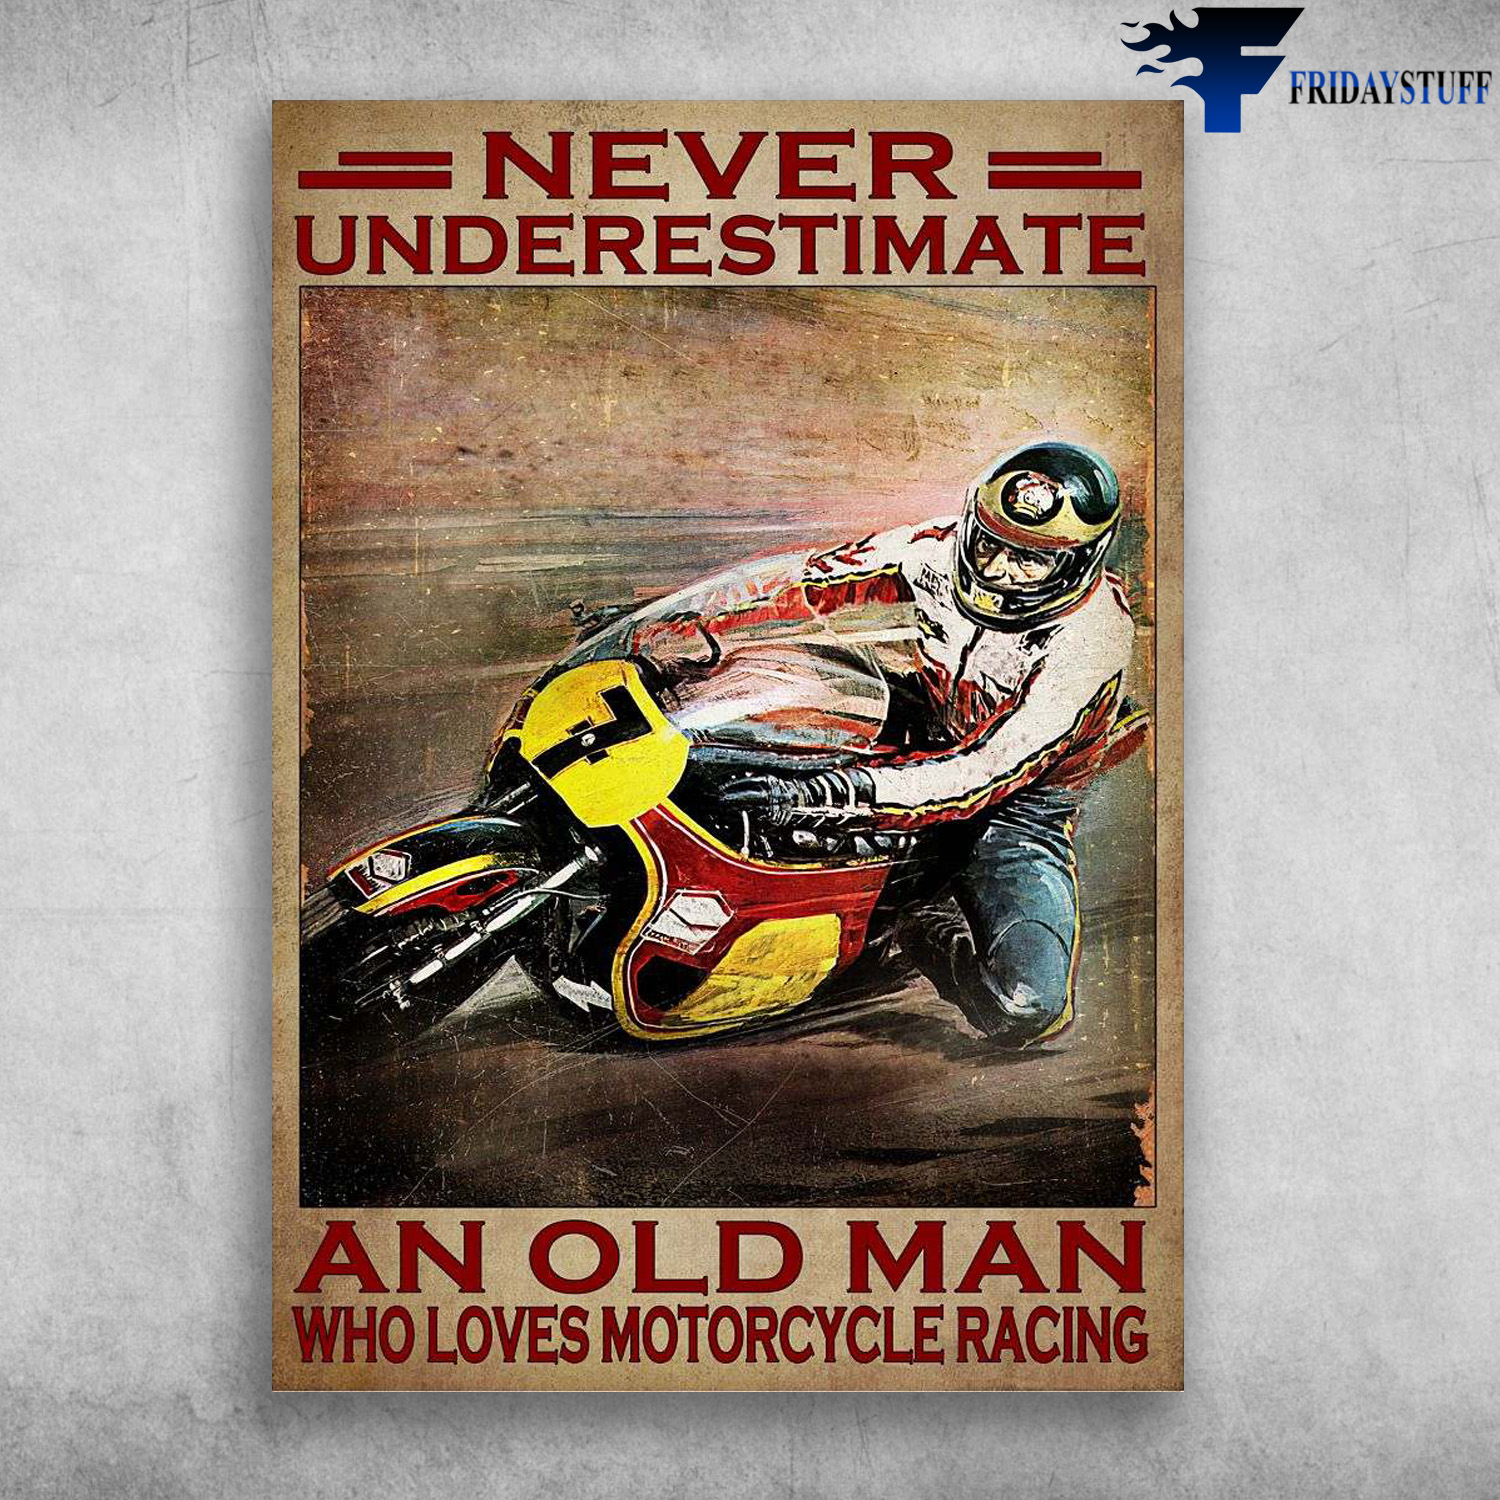 Old Man Racing, Mototcycle Racer - Never Underestimate An Old Man, Who Loves Motorcycle Racing